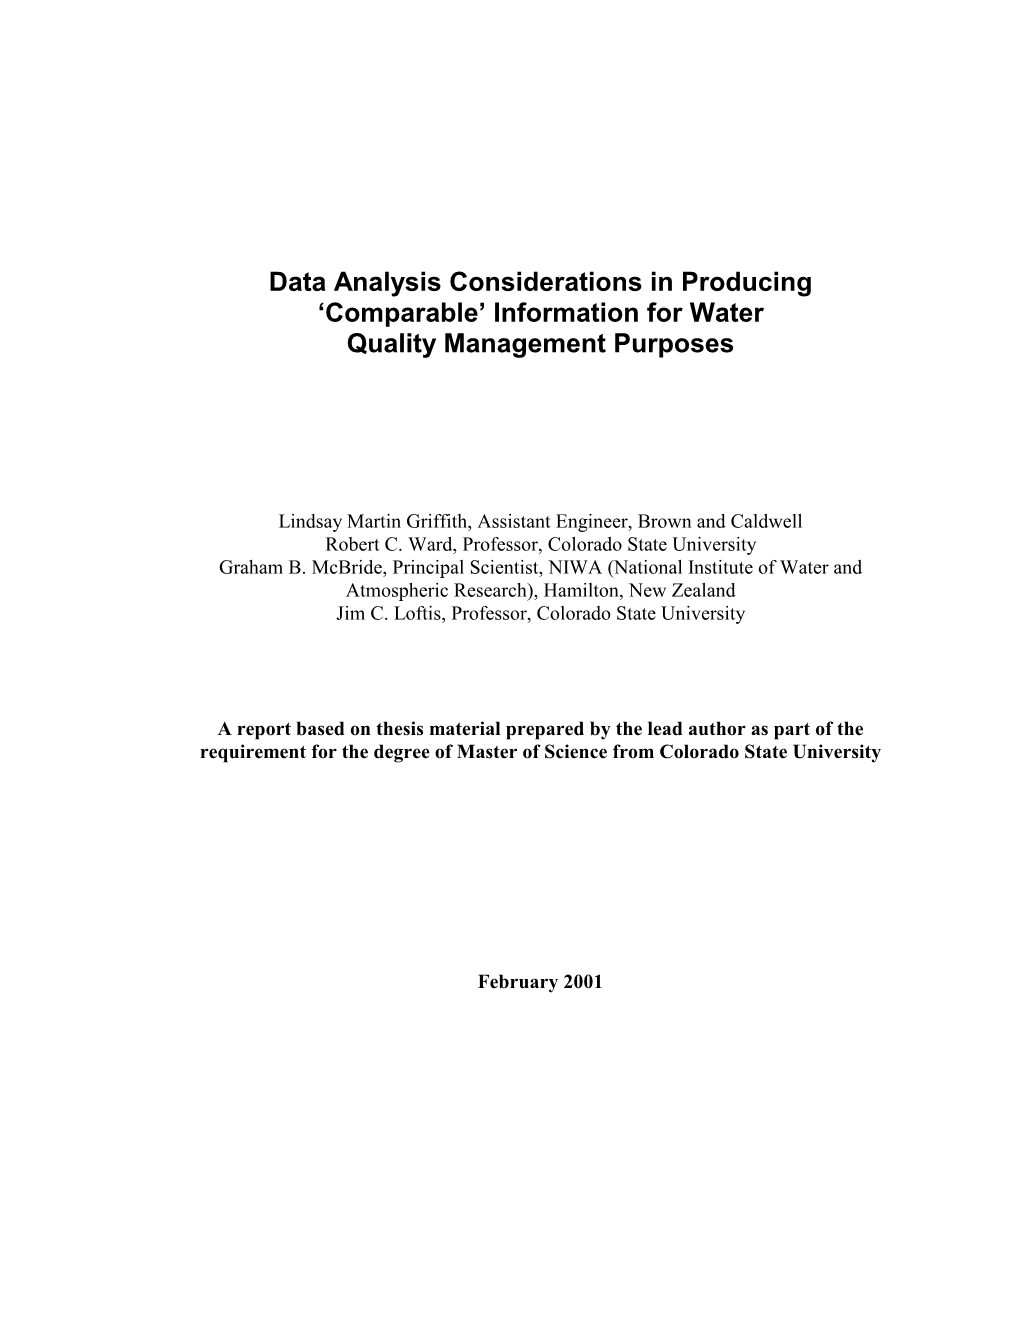 Data Analysis Considerations in Producing 'Comparable' Information